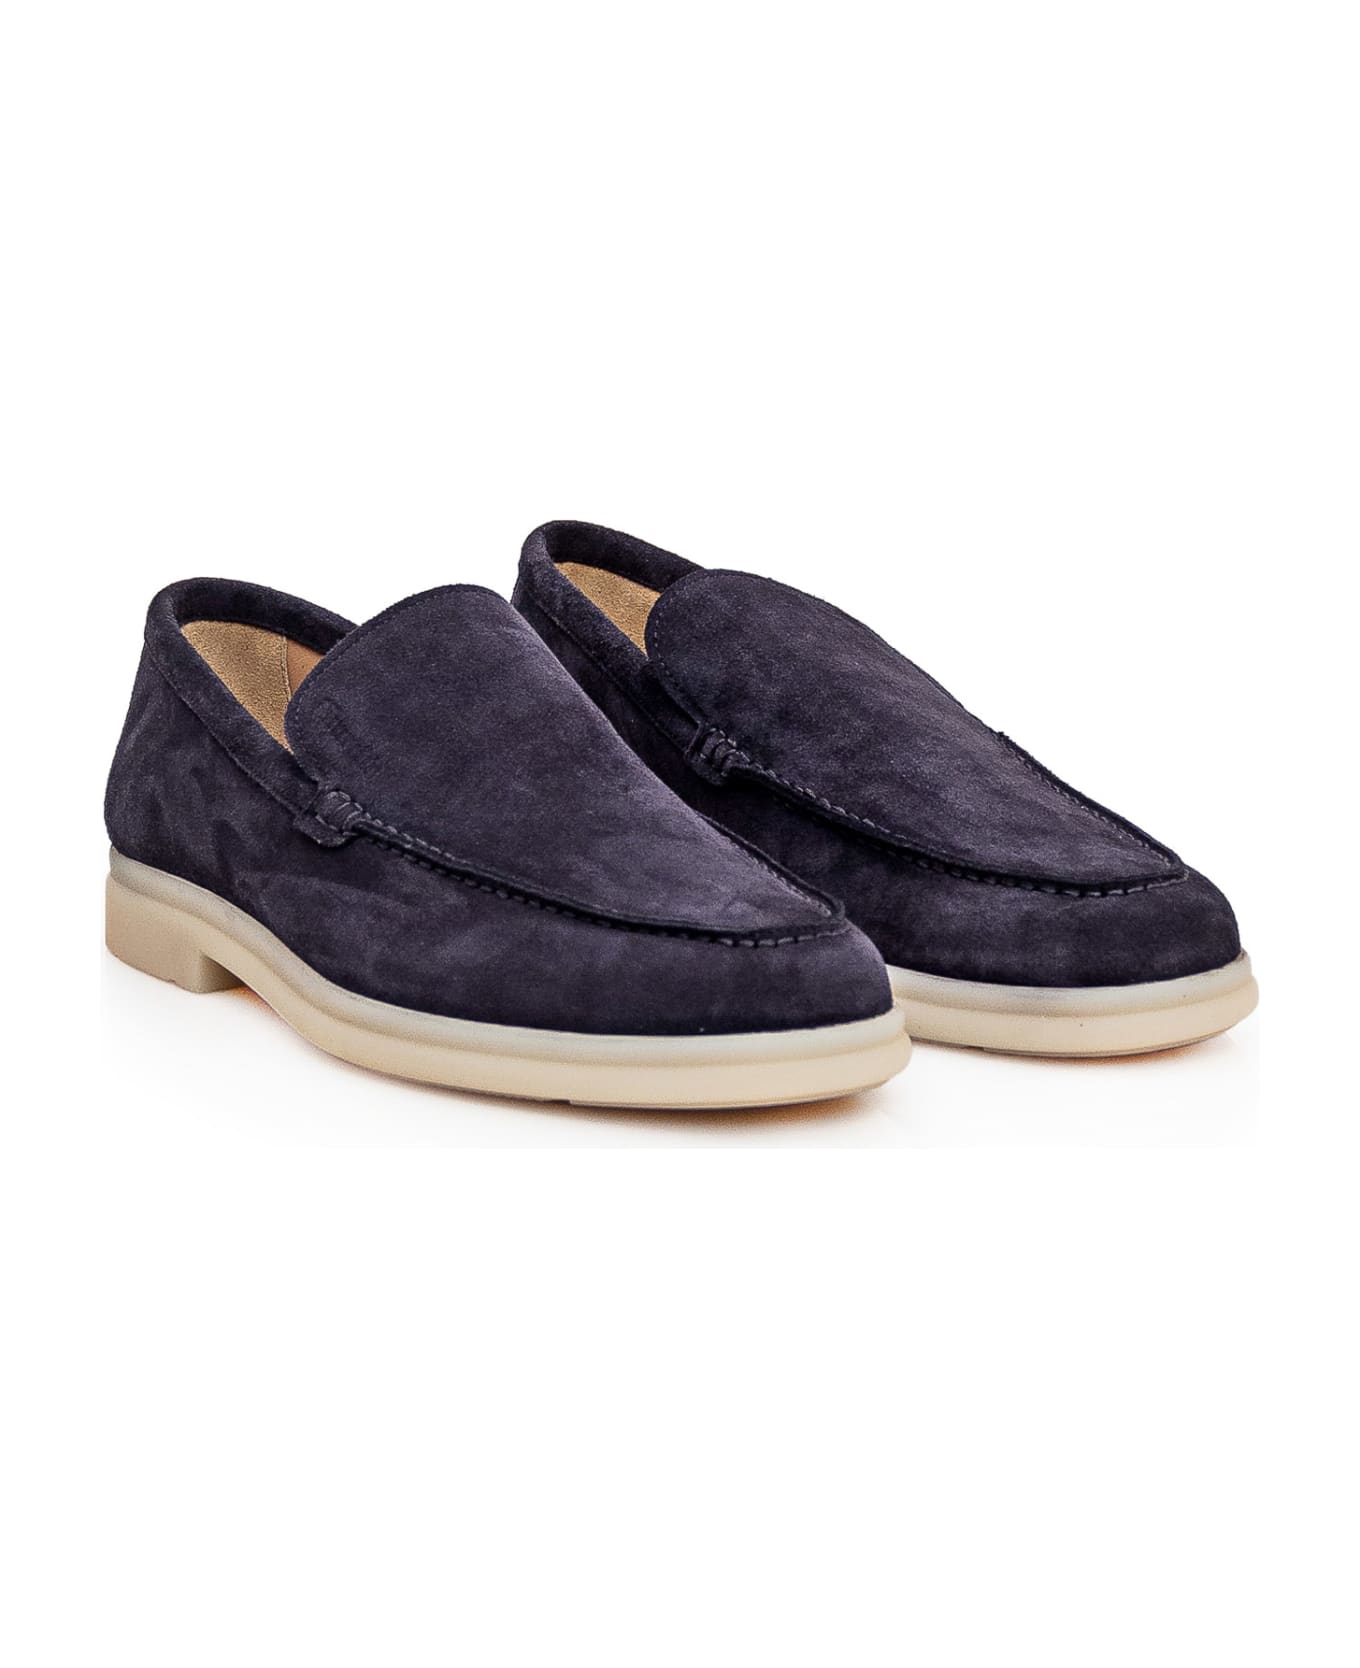 Church's Leather Loafer - NAVY ローファー＆デッキシューズ